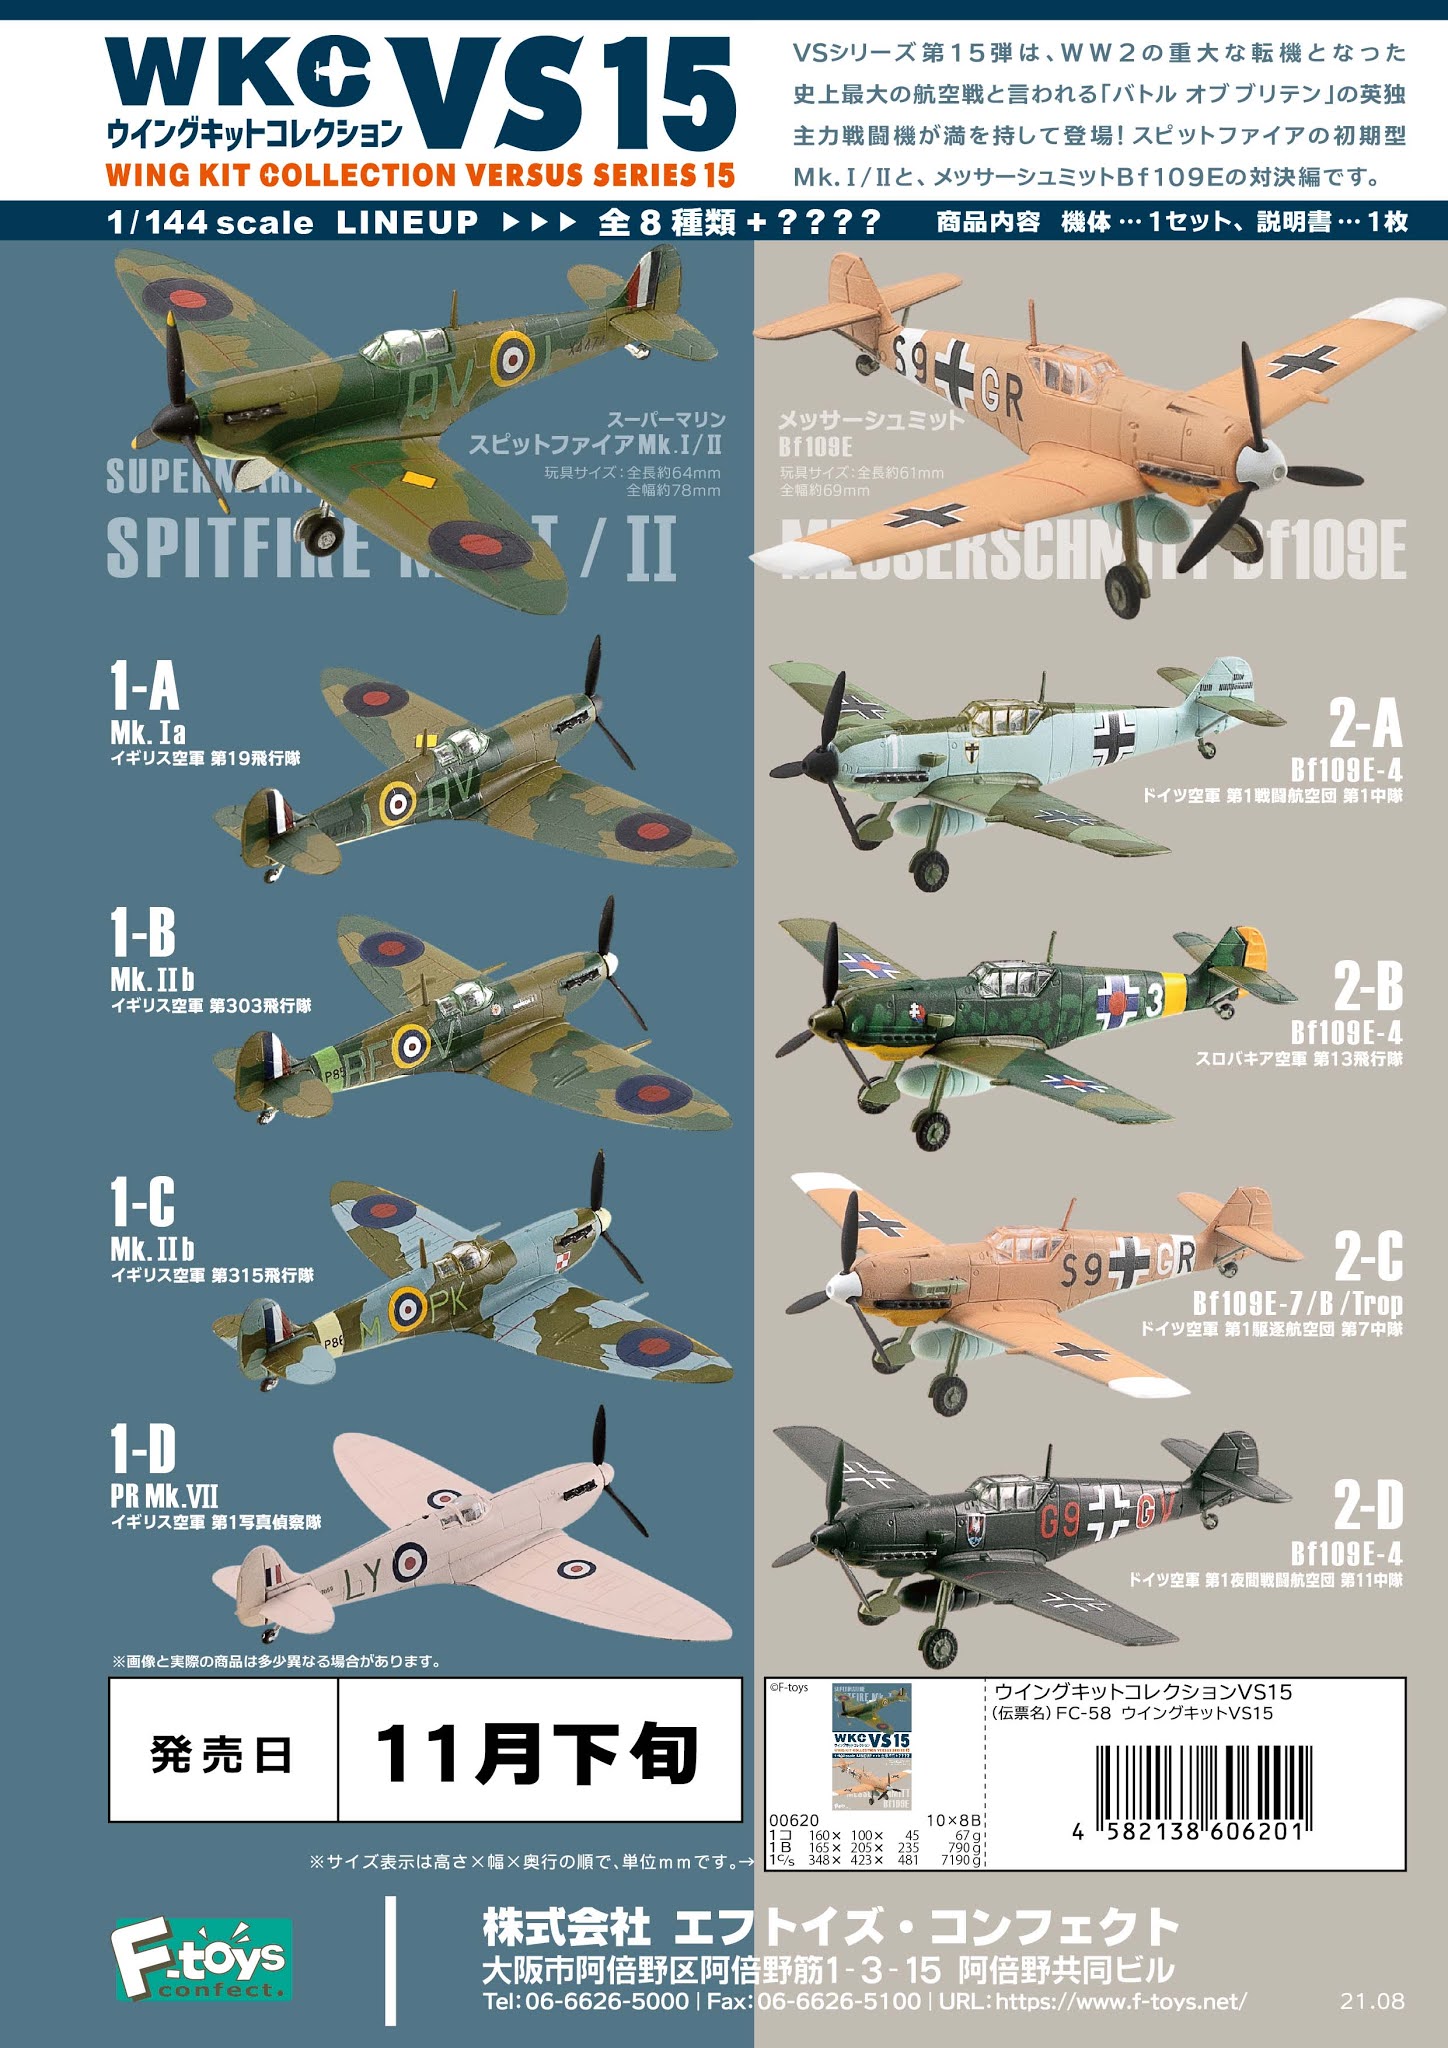 Vs collection. Ki-43-II фирмы f-Toys набор Wing Kit collection Vol.4.